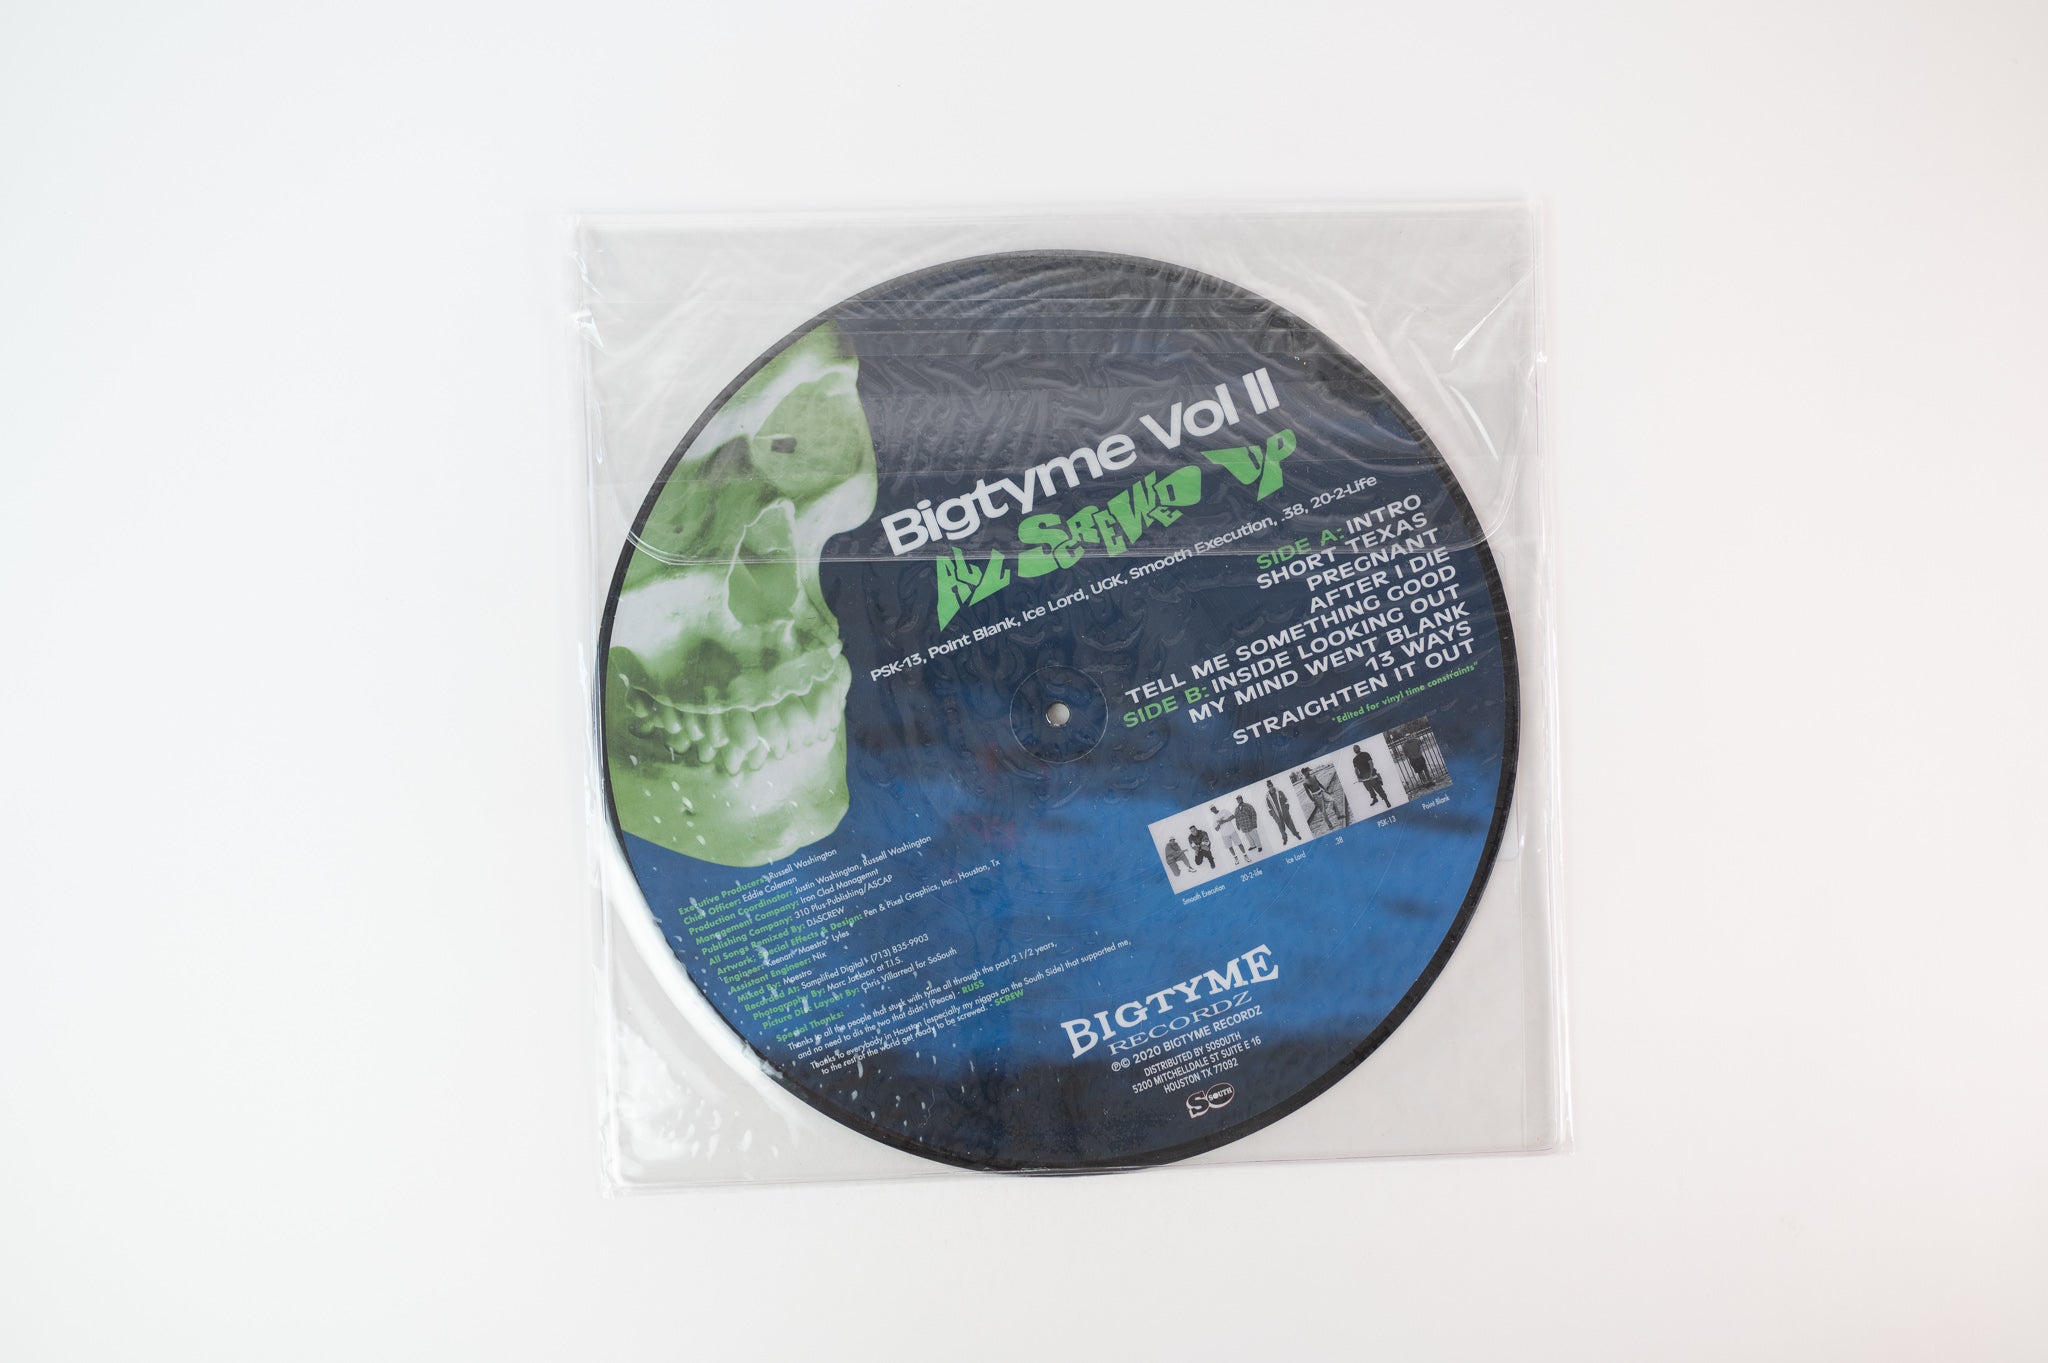 DJ Screw - Bigtyme Vol II All Screwed Up on Bigtyme Limited Picture Disc